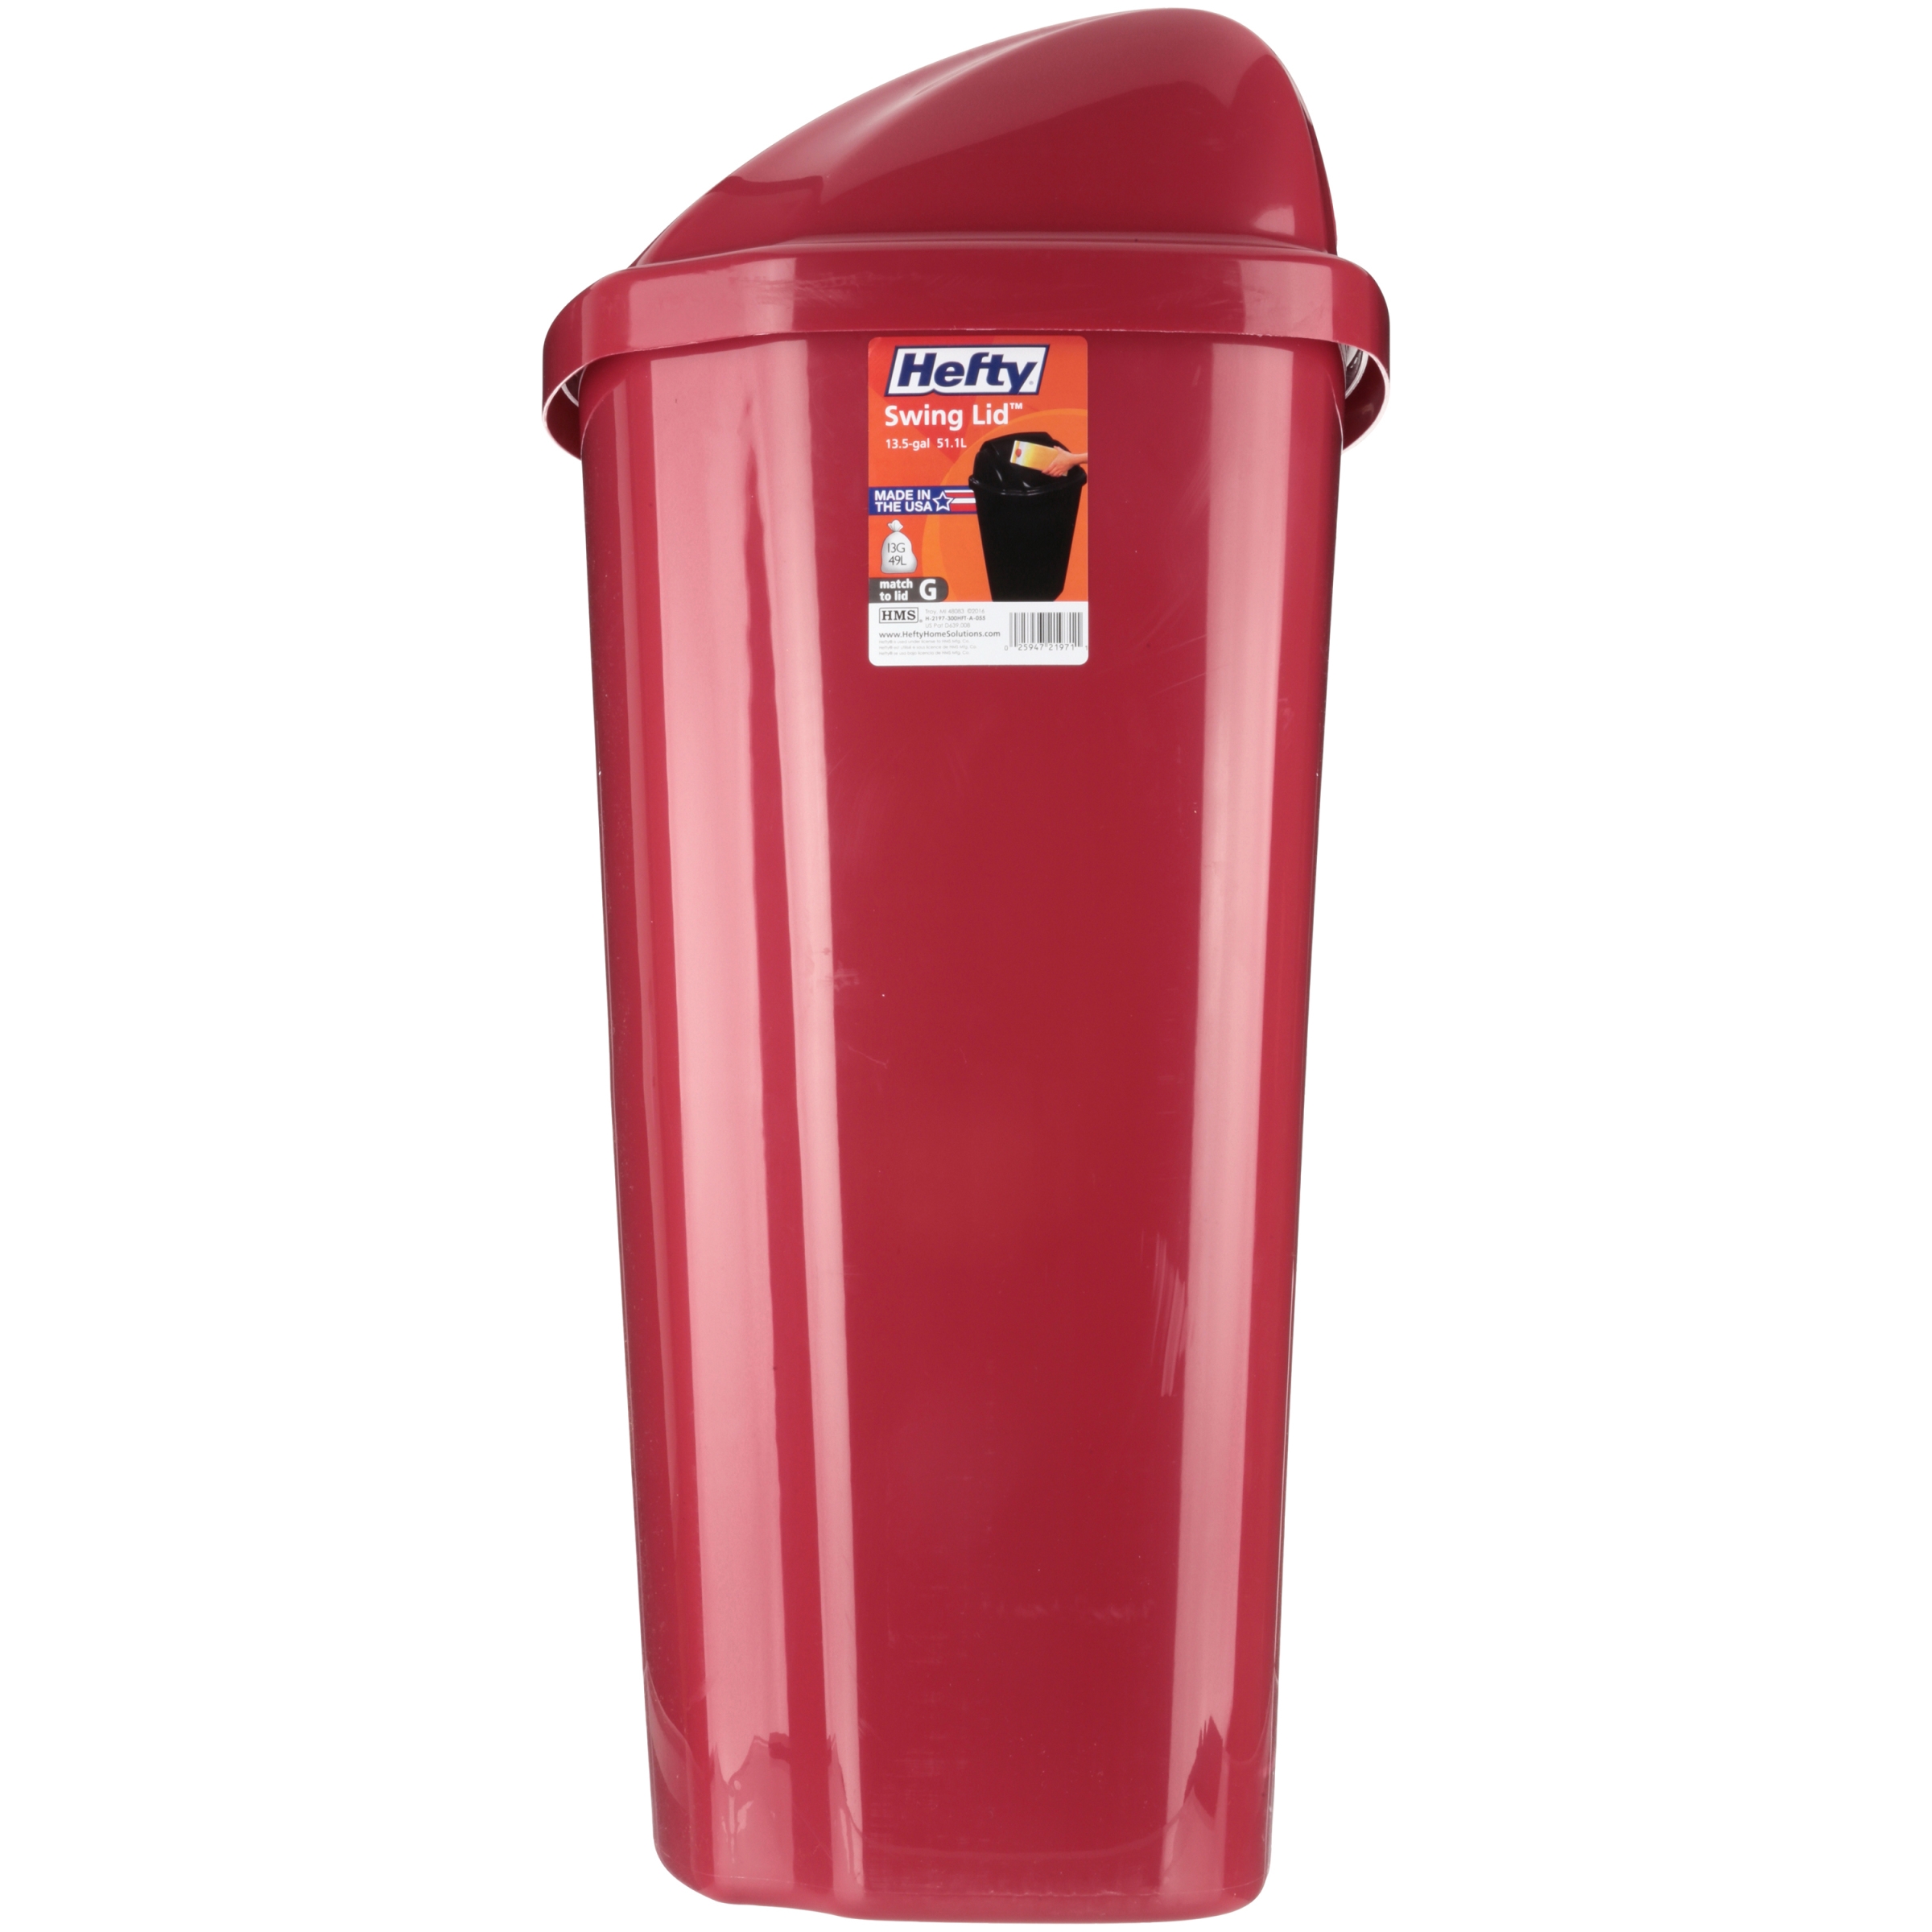 Hefty Swing-Lid 13.5-Gallon Trash Can, Multiple Colors - image 3 of 4